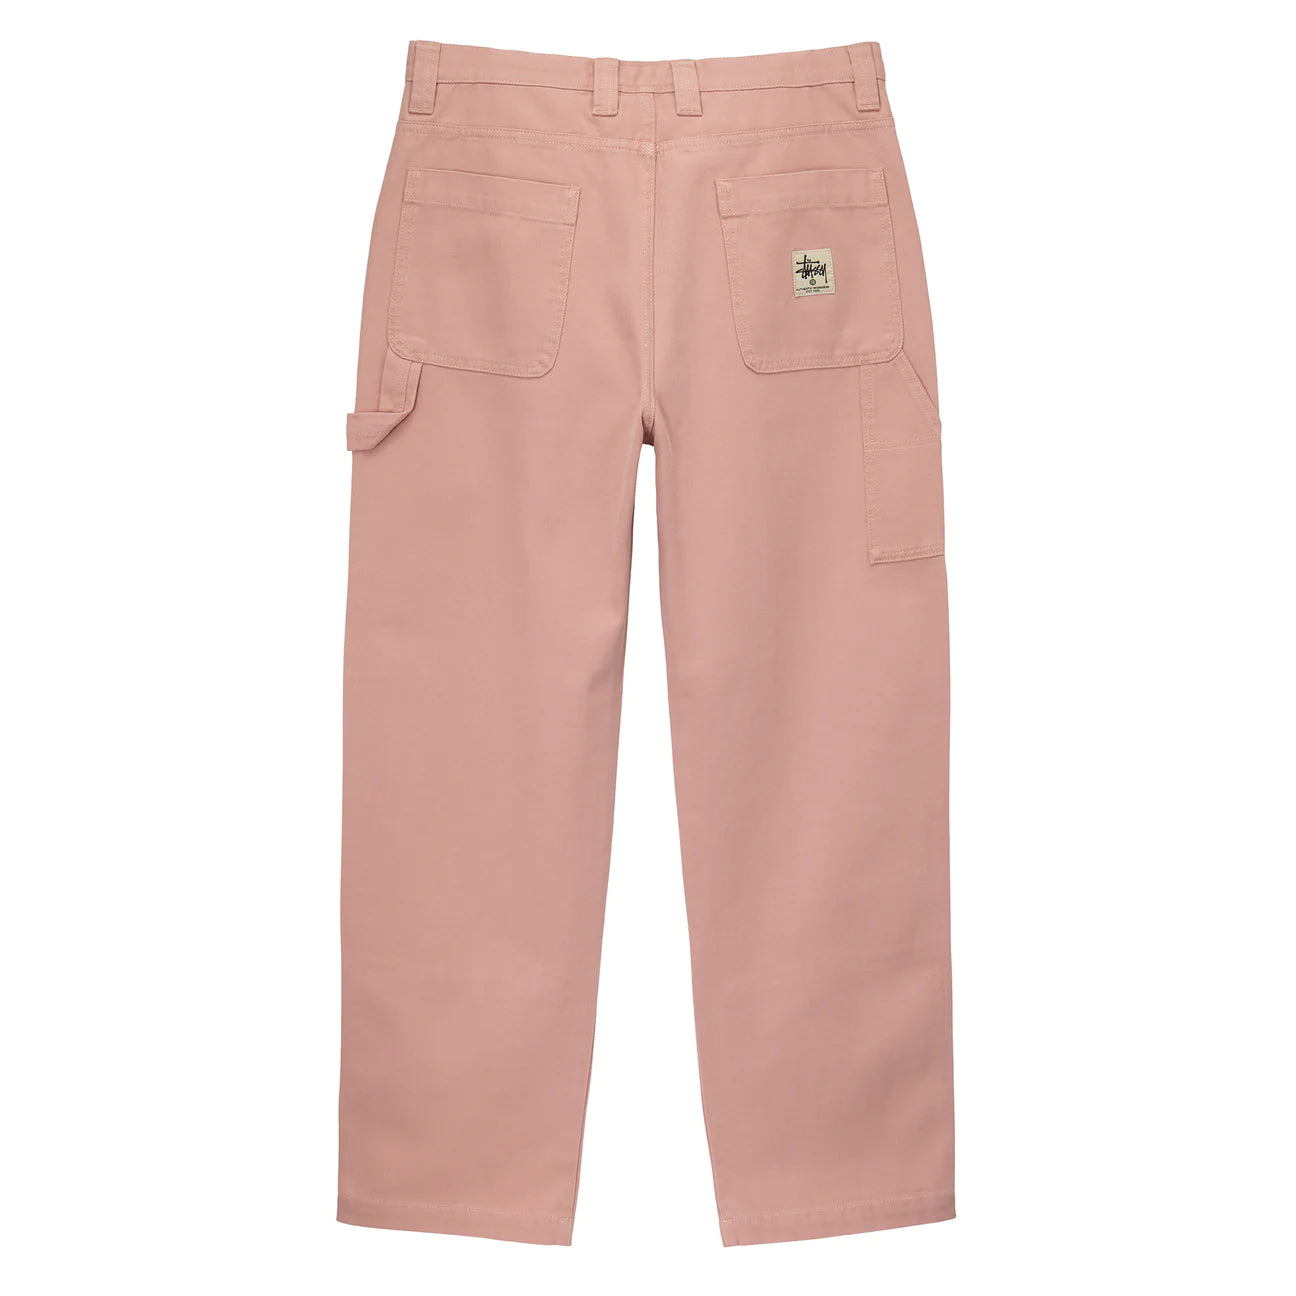 Light pink women's cargo pants with pockets - Clothing Light pink